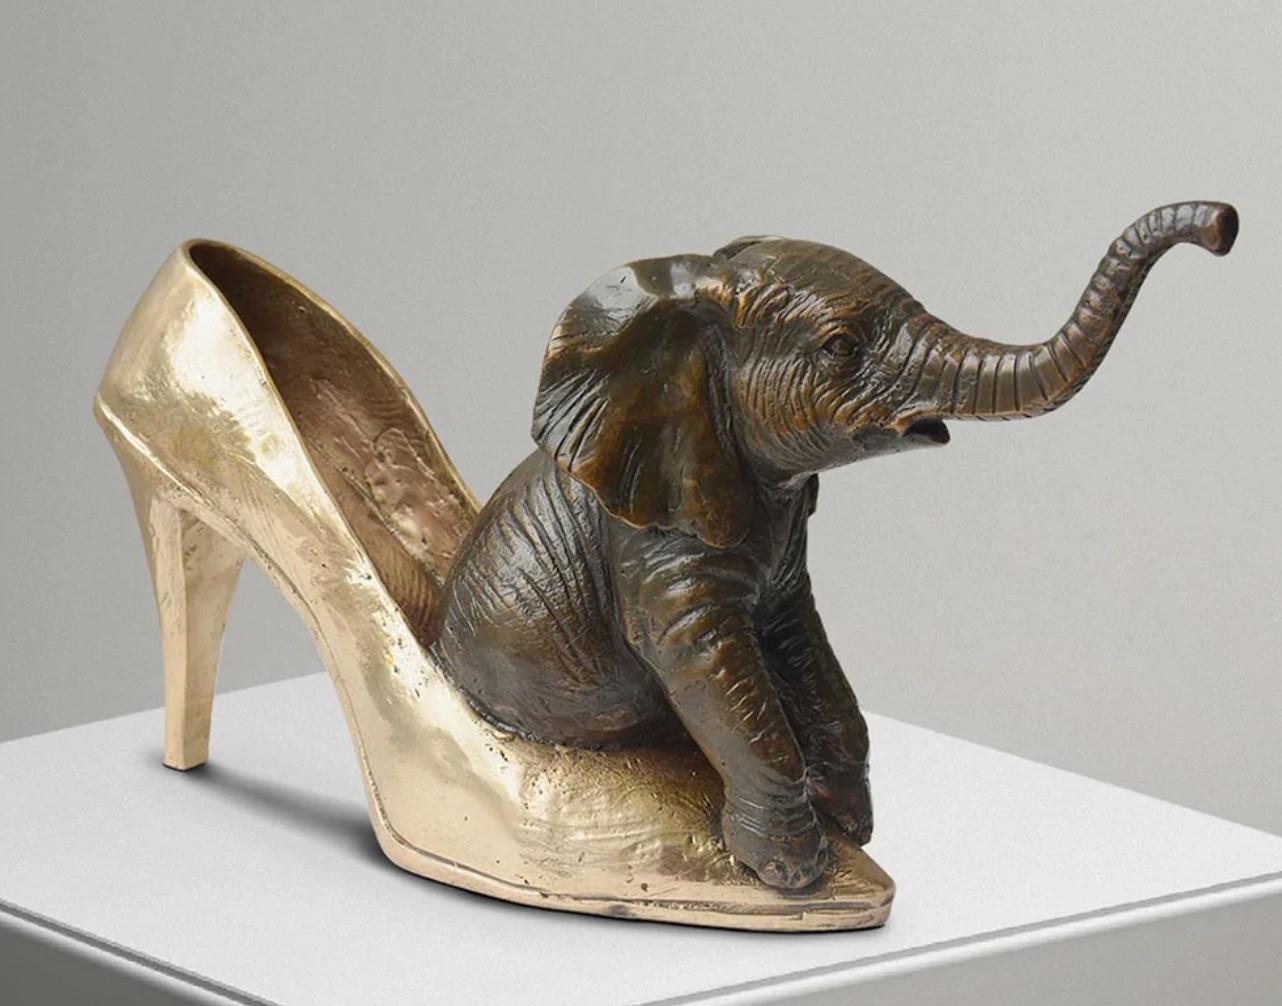 Authentic Bronze Walk With The Elephant with Gold Patina by Gillie and Marc - Contemporary Sculpture by Gillie and Marc Schattner